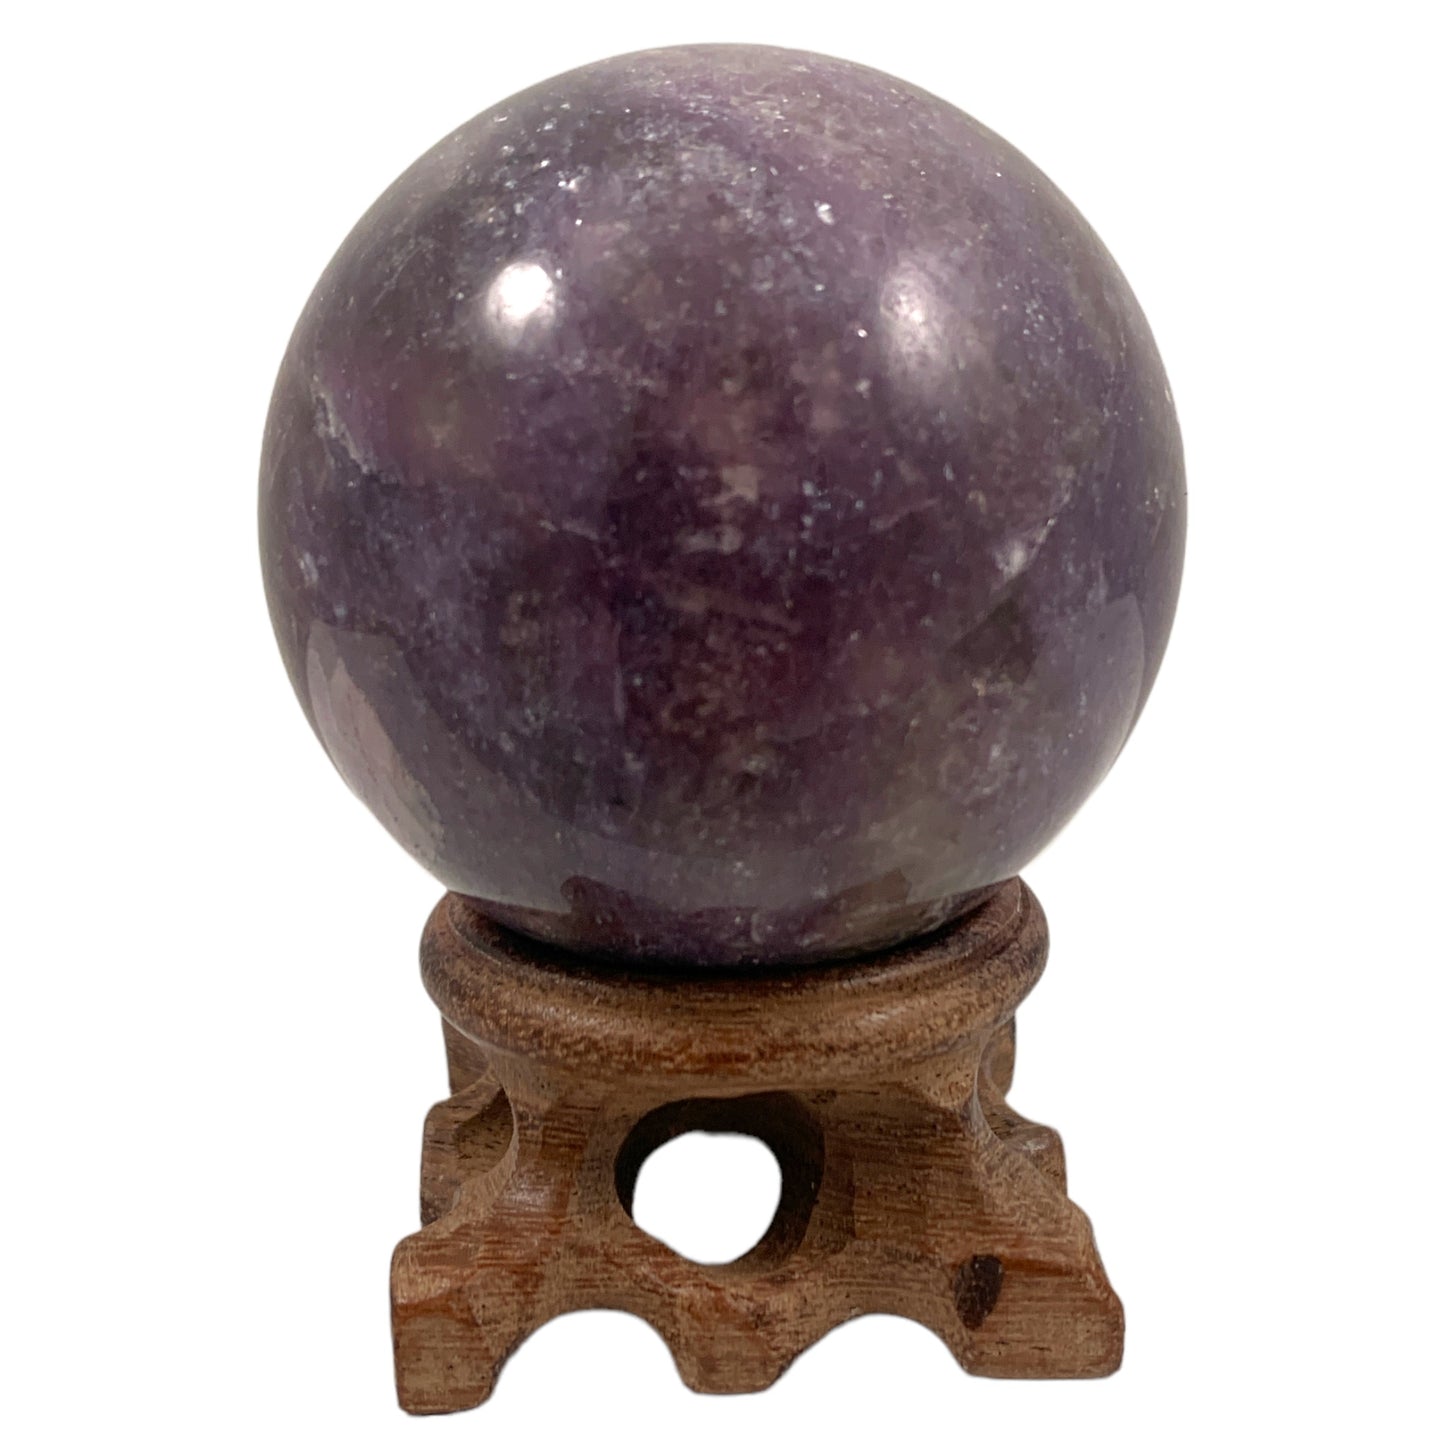 UNICORN STONE - 40-80mm - Sphere - Sold by the gram - NEW622